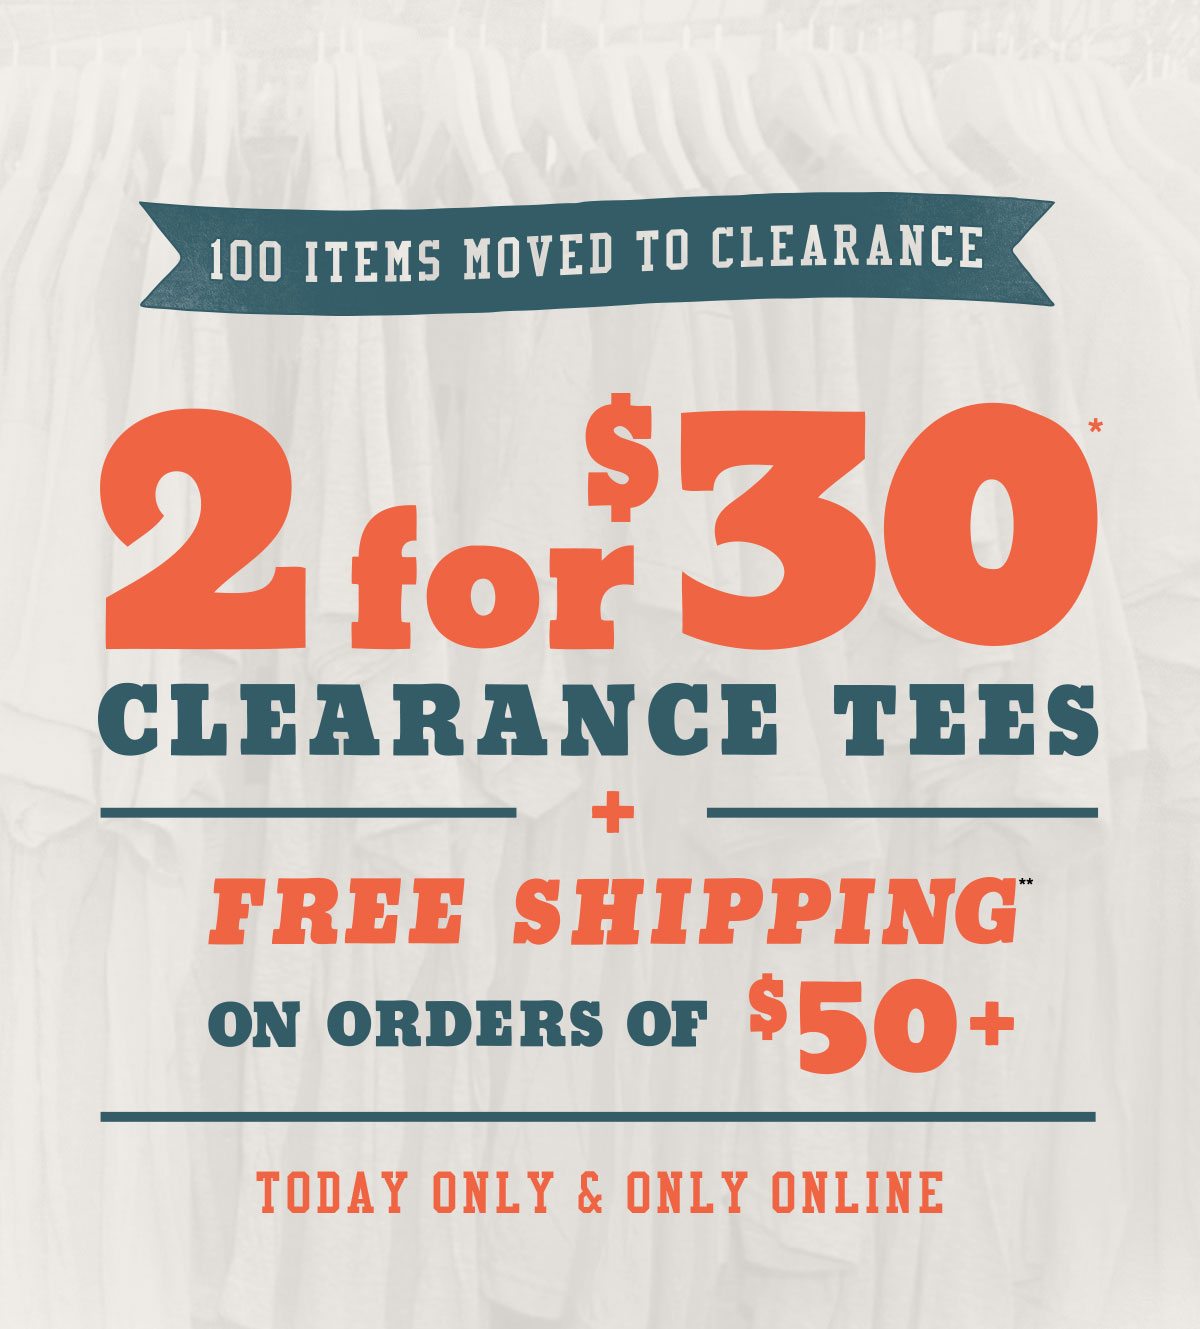 2 for $30* Clearance Tee | Today Only and Only Online